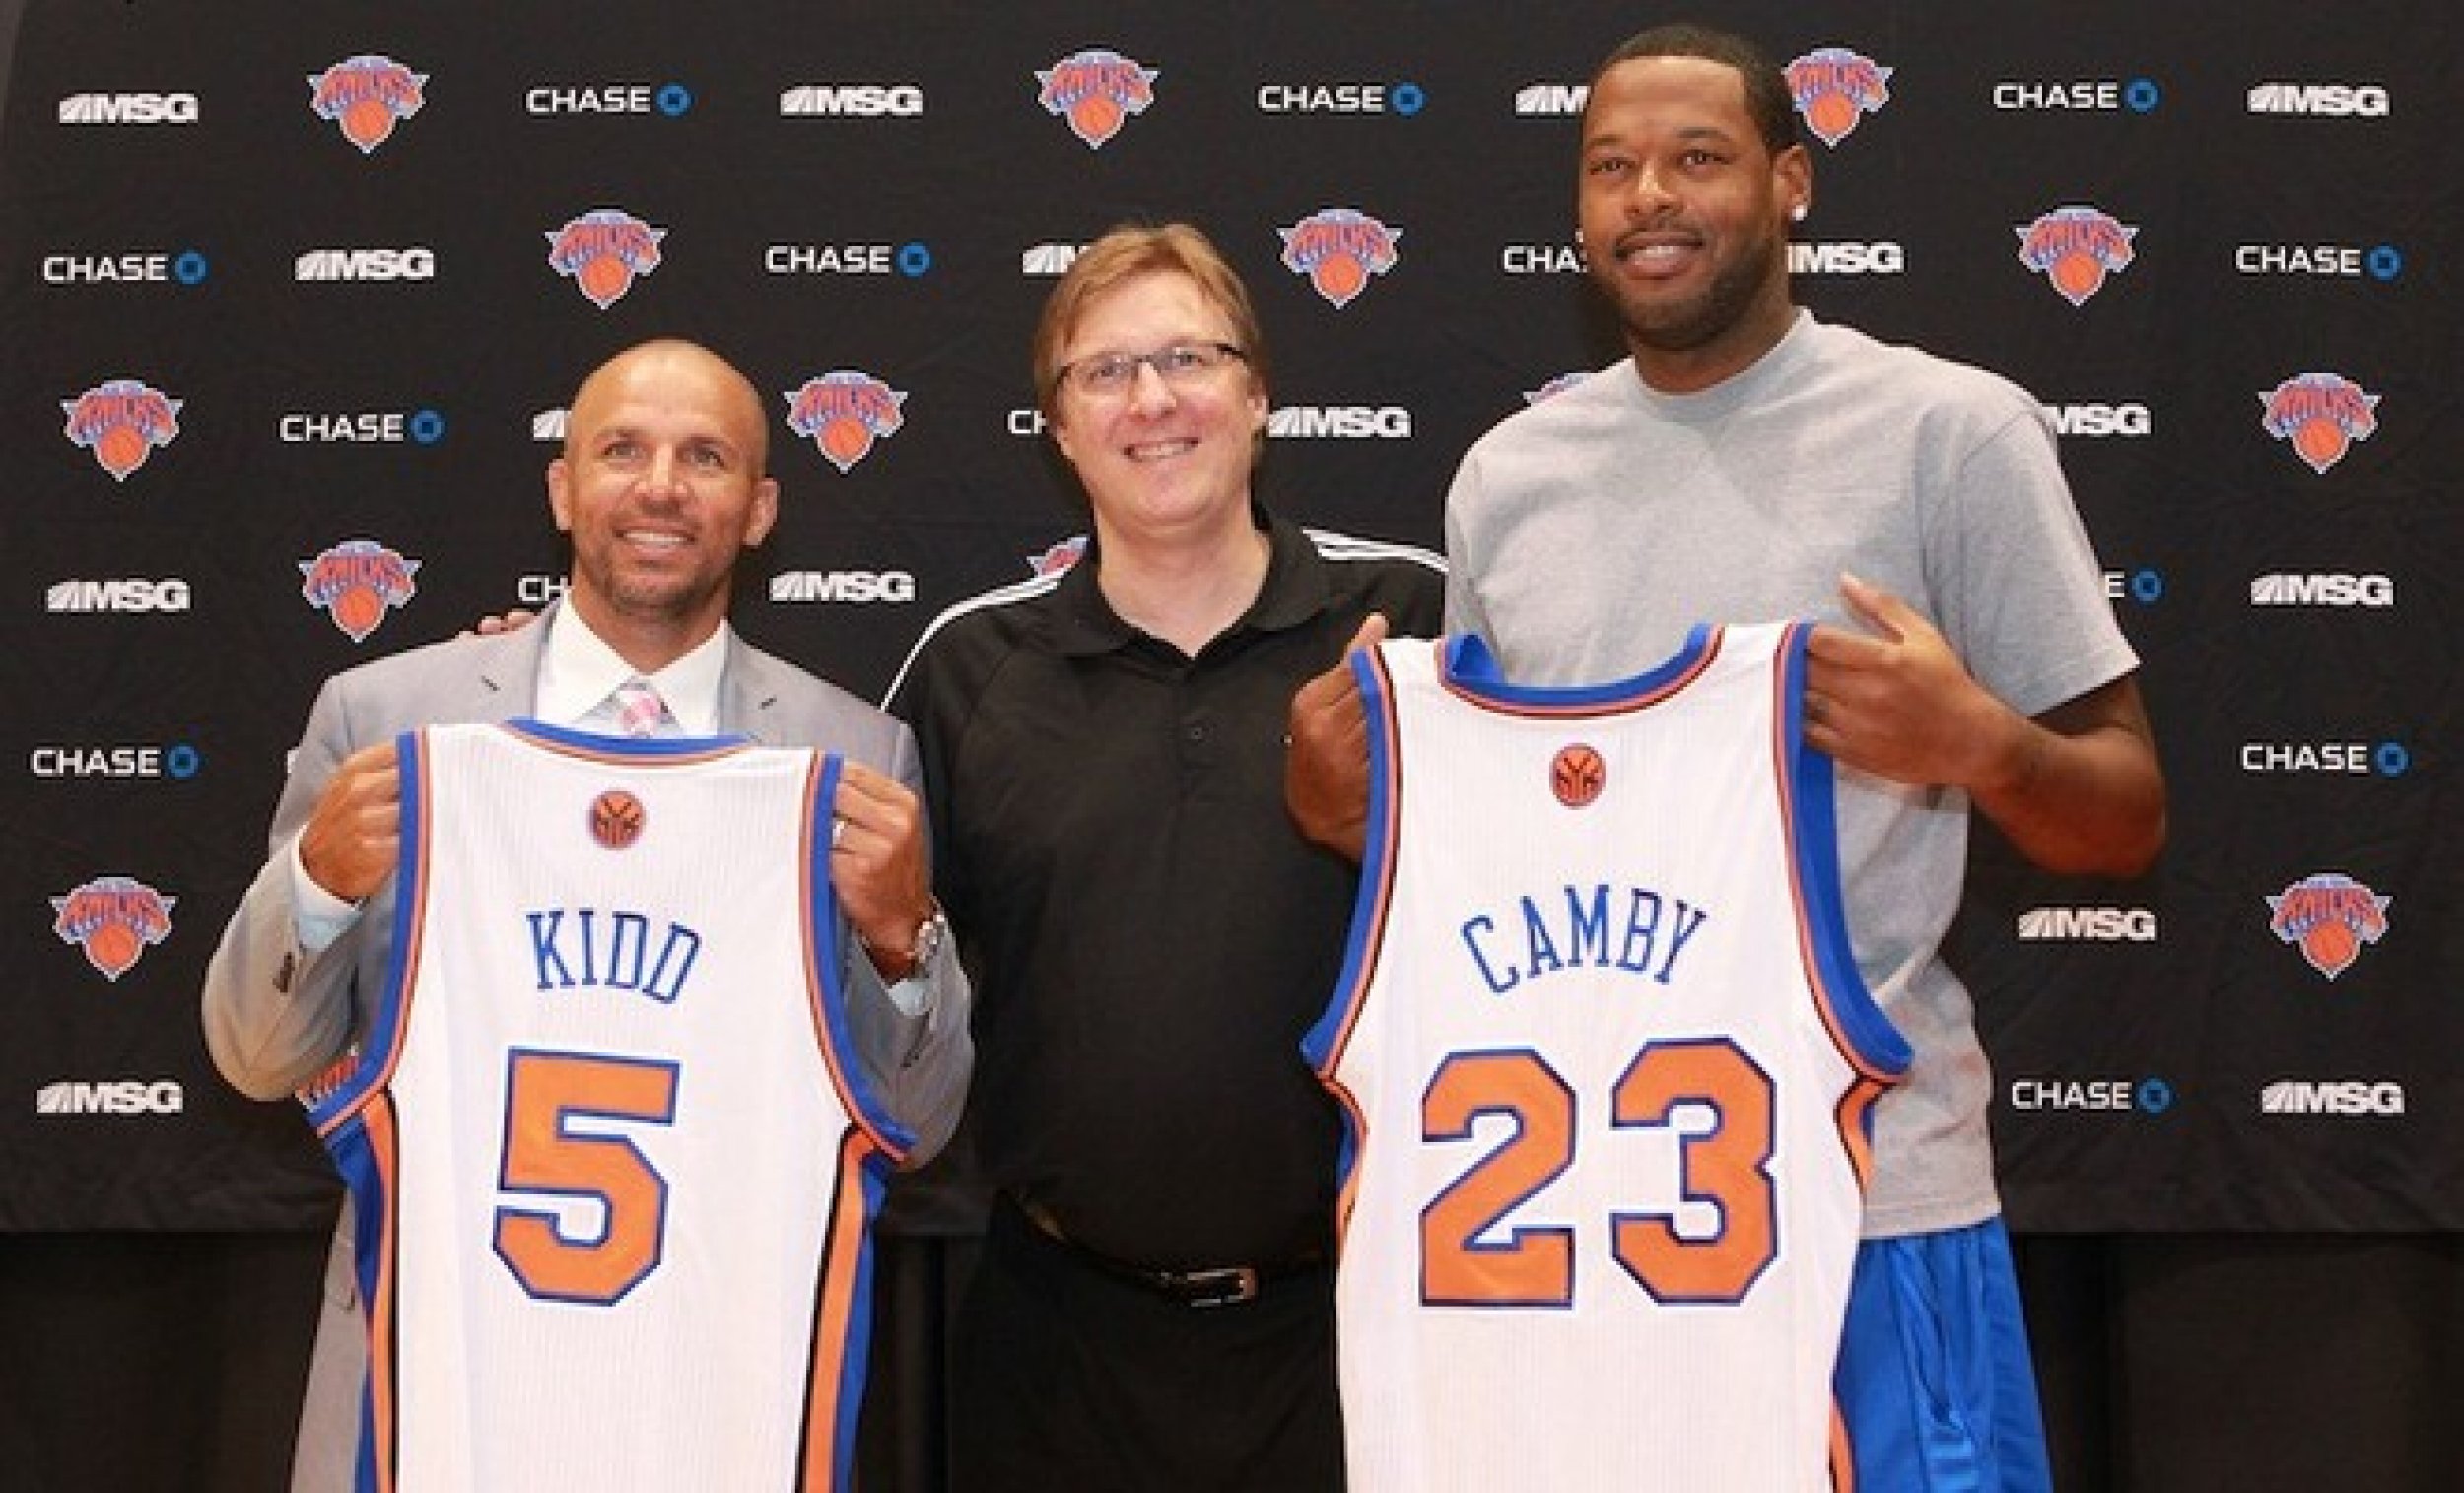 Jason Kidd l. and Marcus Camby r.